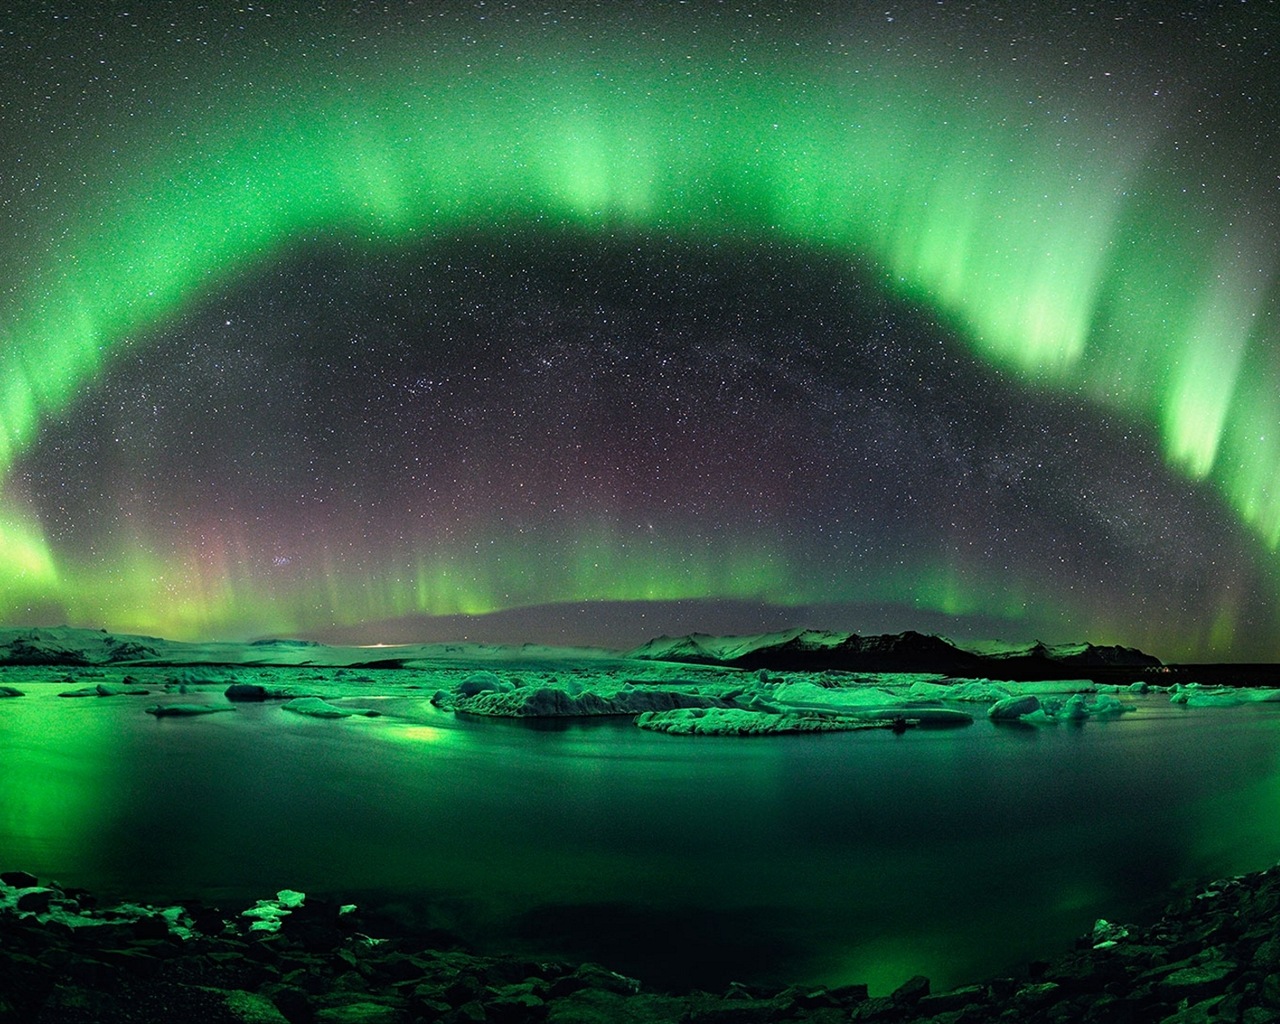 Natural wonders of the Northern Lights HD Wallpaper (2) #10 - 1280x1024